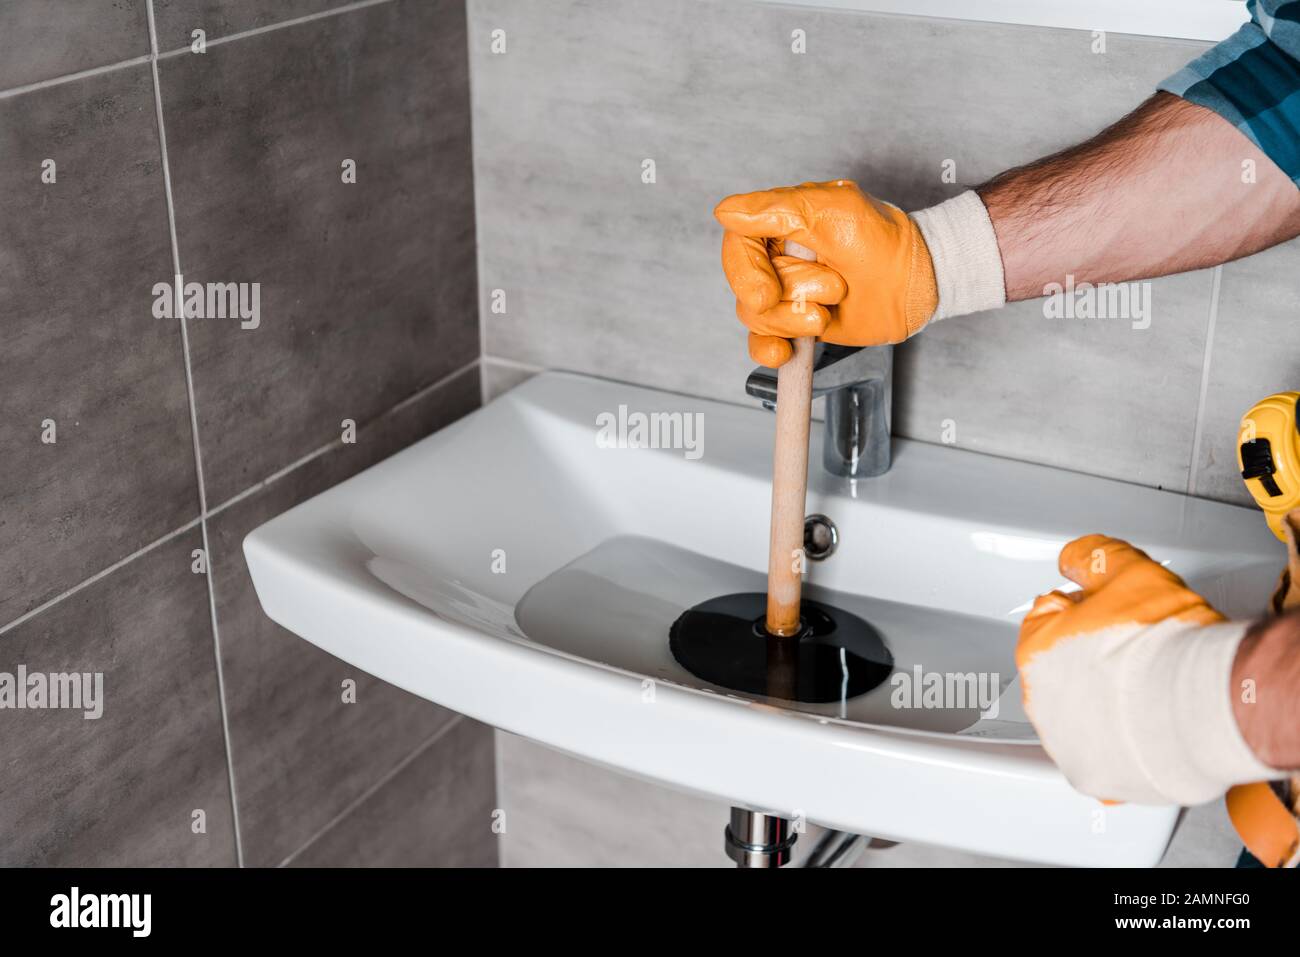 https://c8.alamy.com/comp/2AMNFG0/cropped-view-of-man-holding-plunger-in-sink-with-water-2AMNFG0.jpg